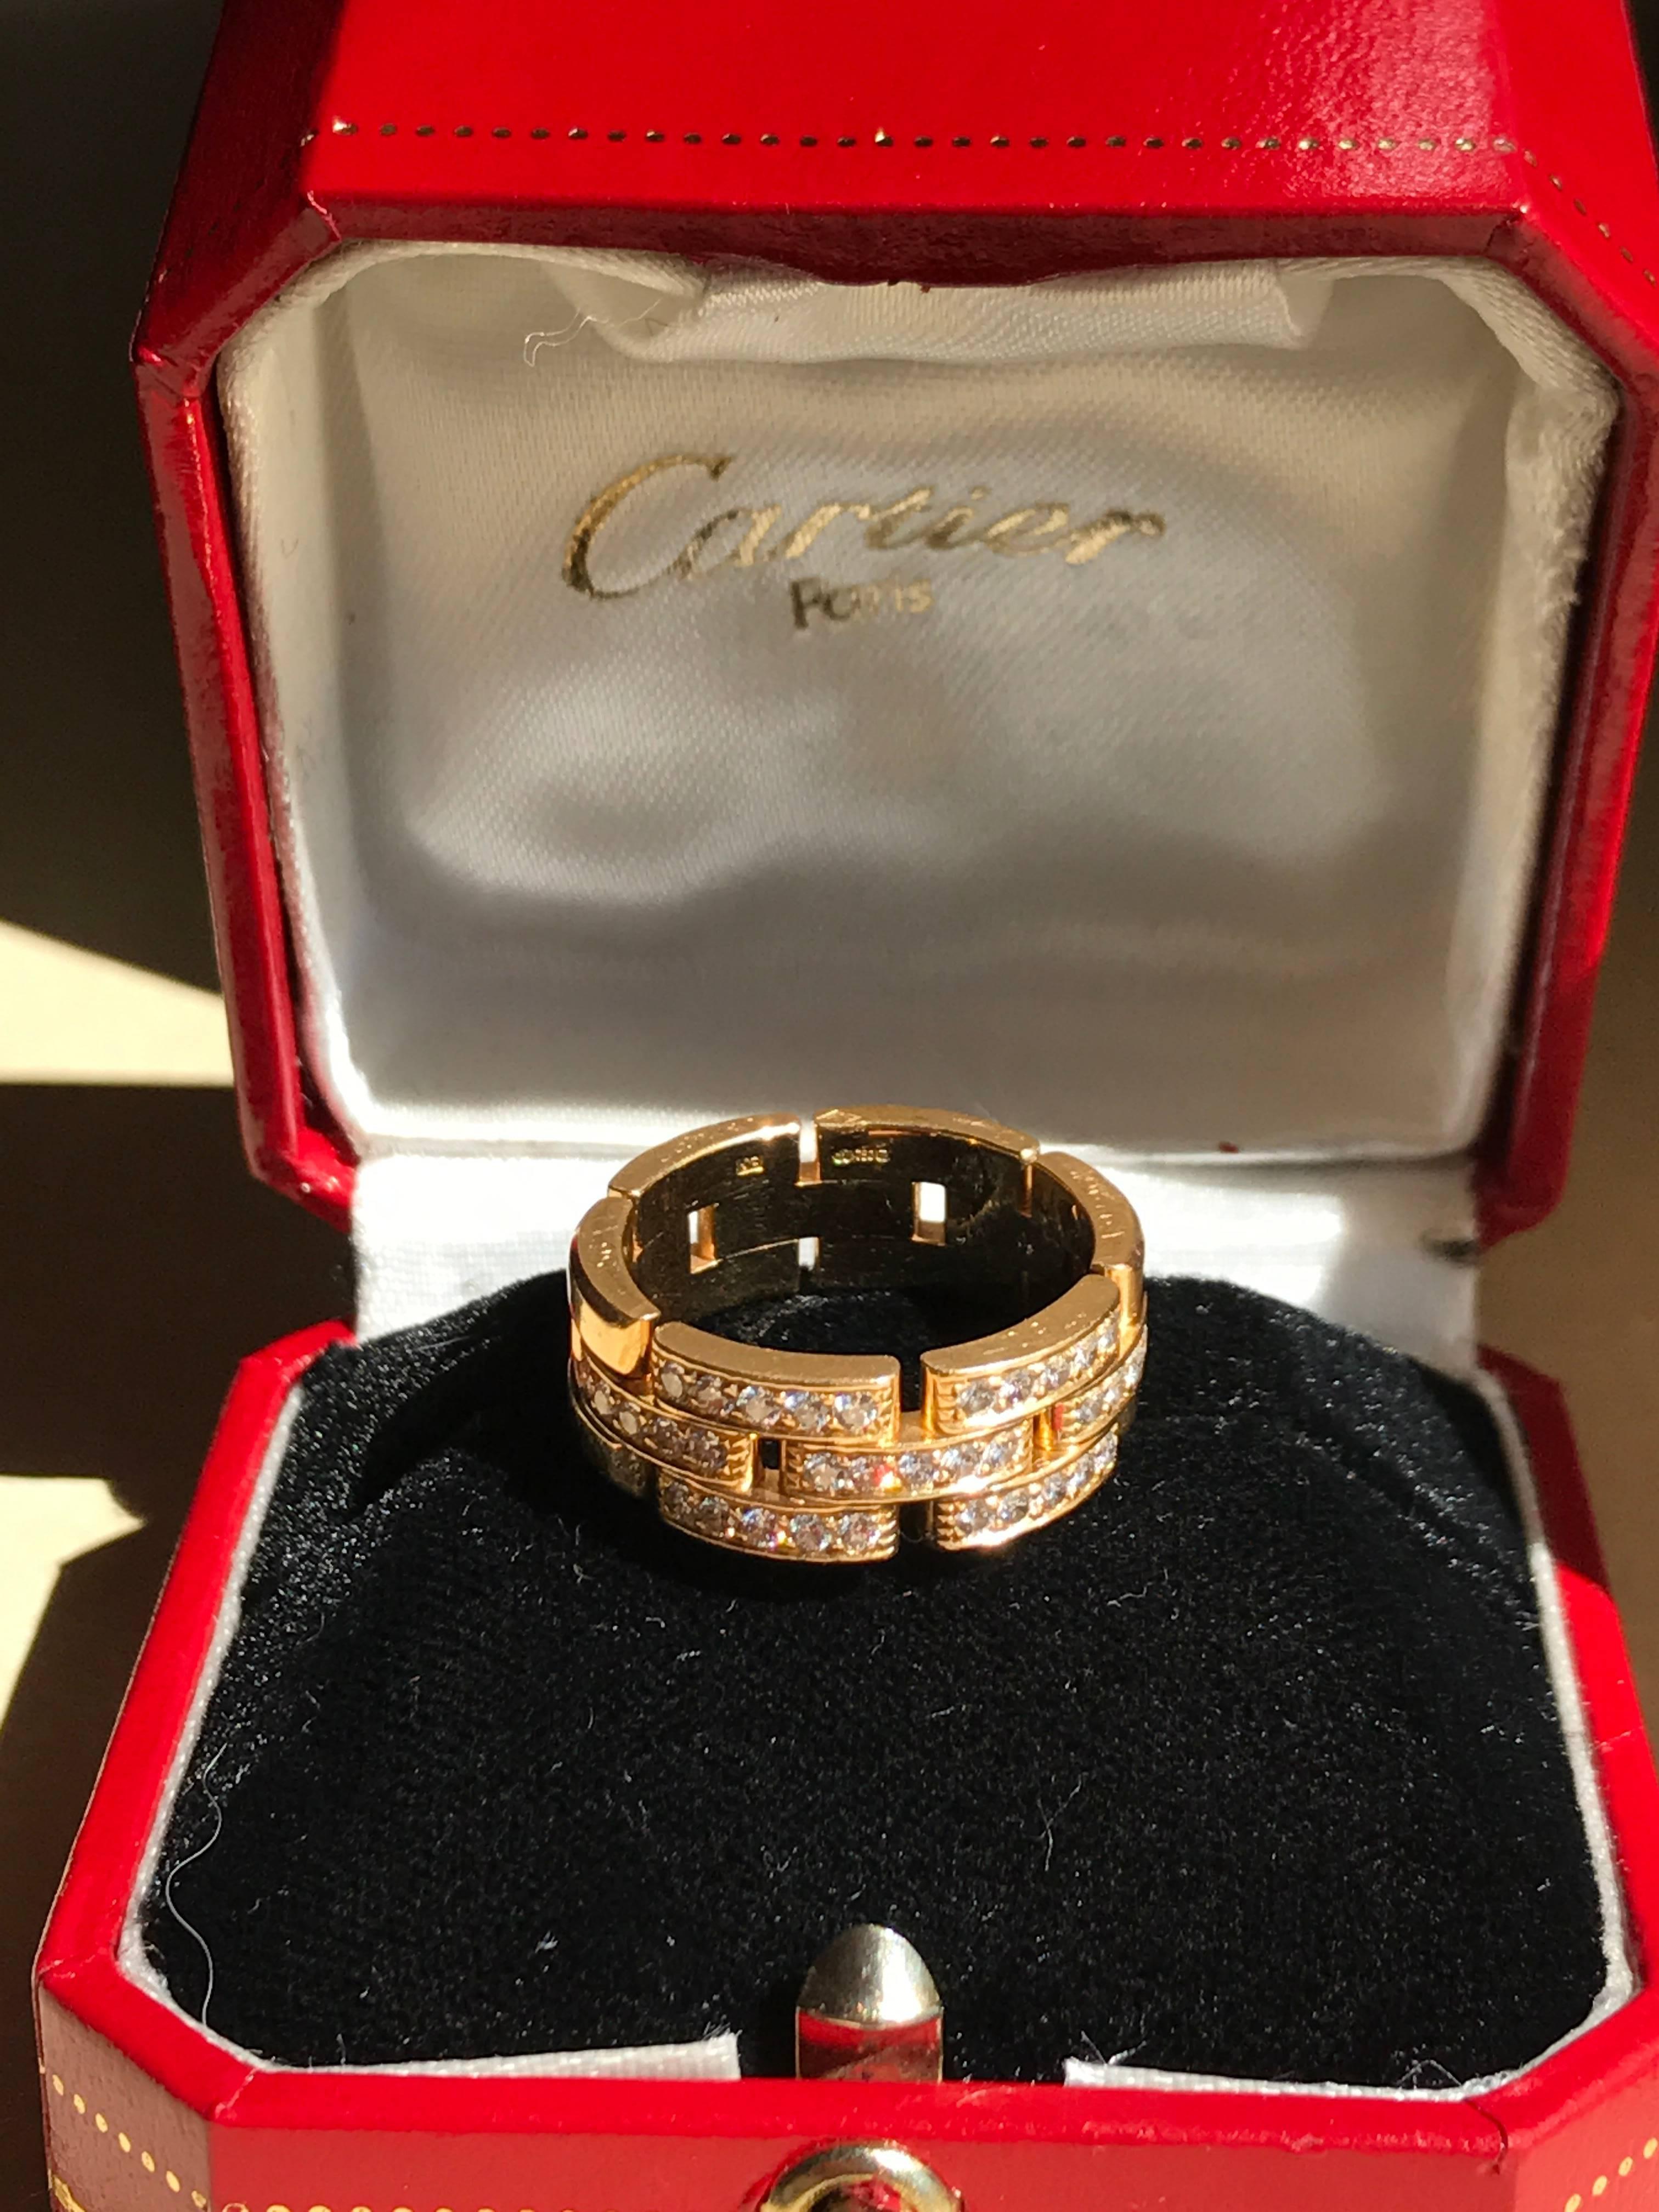 Women's Cartier Maillon Panthere Diamond Ring